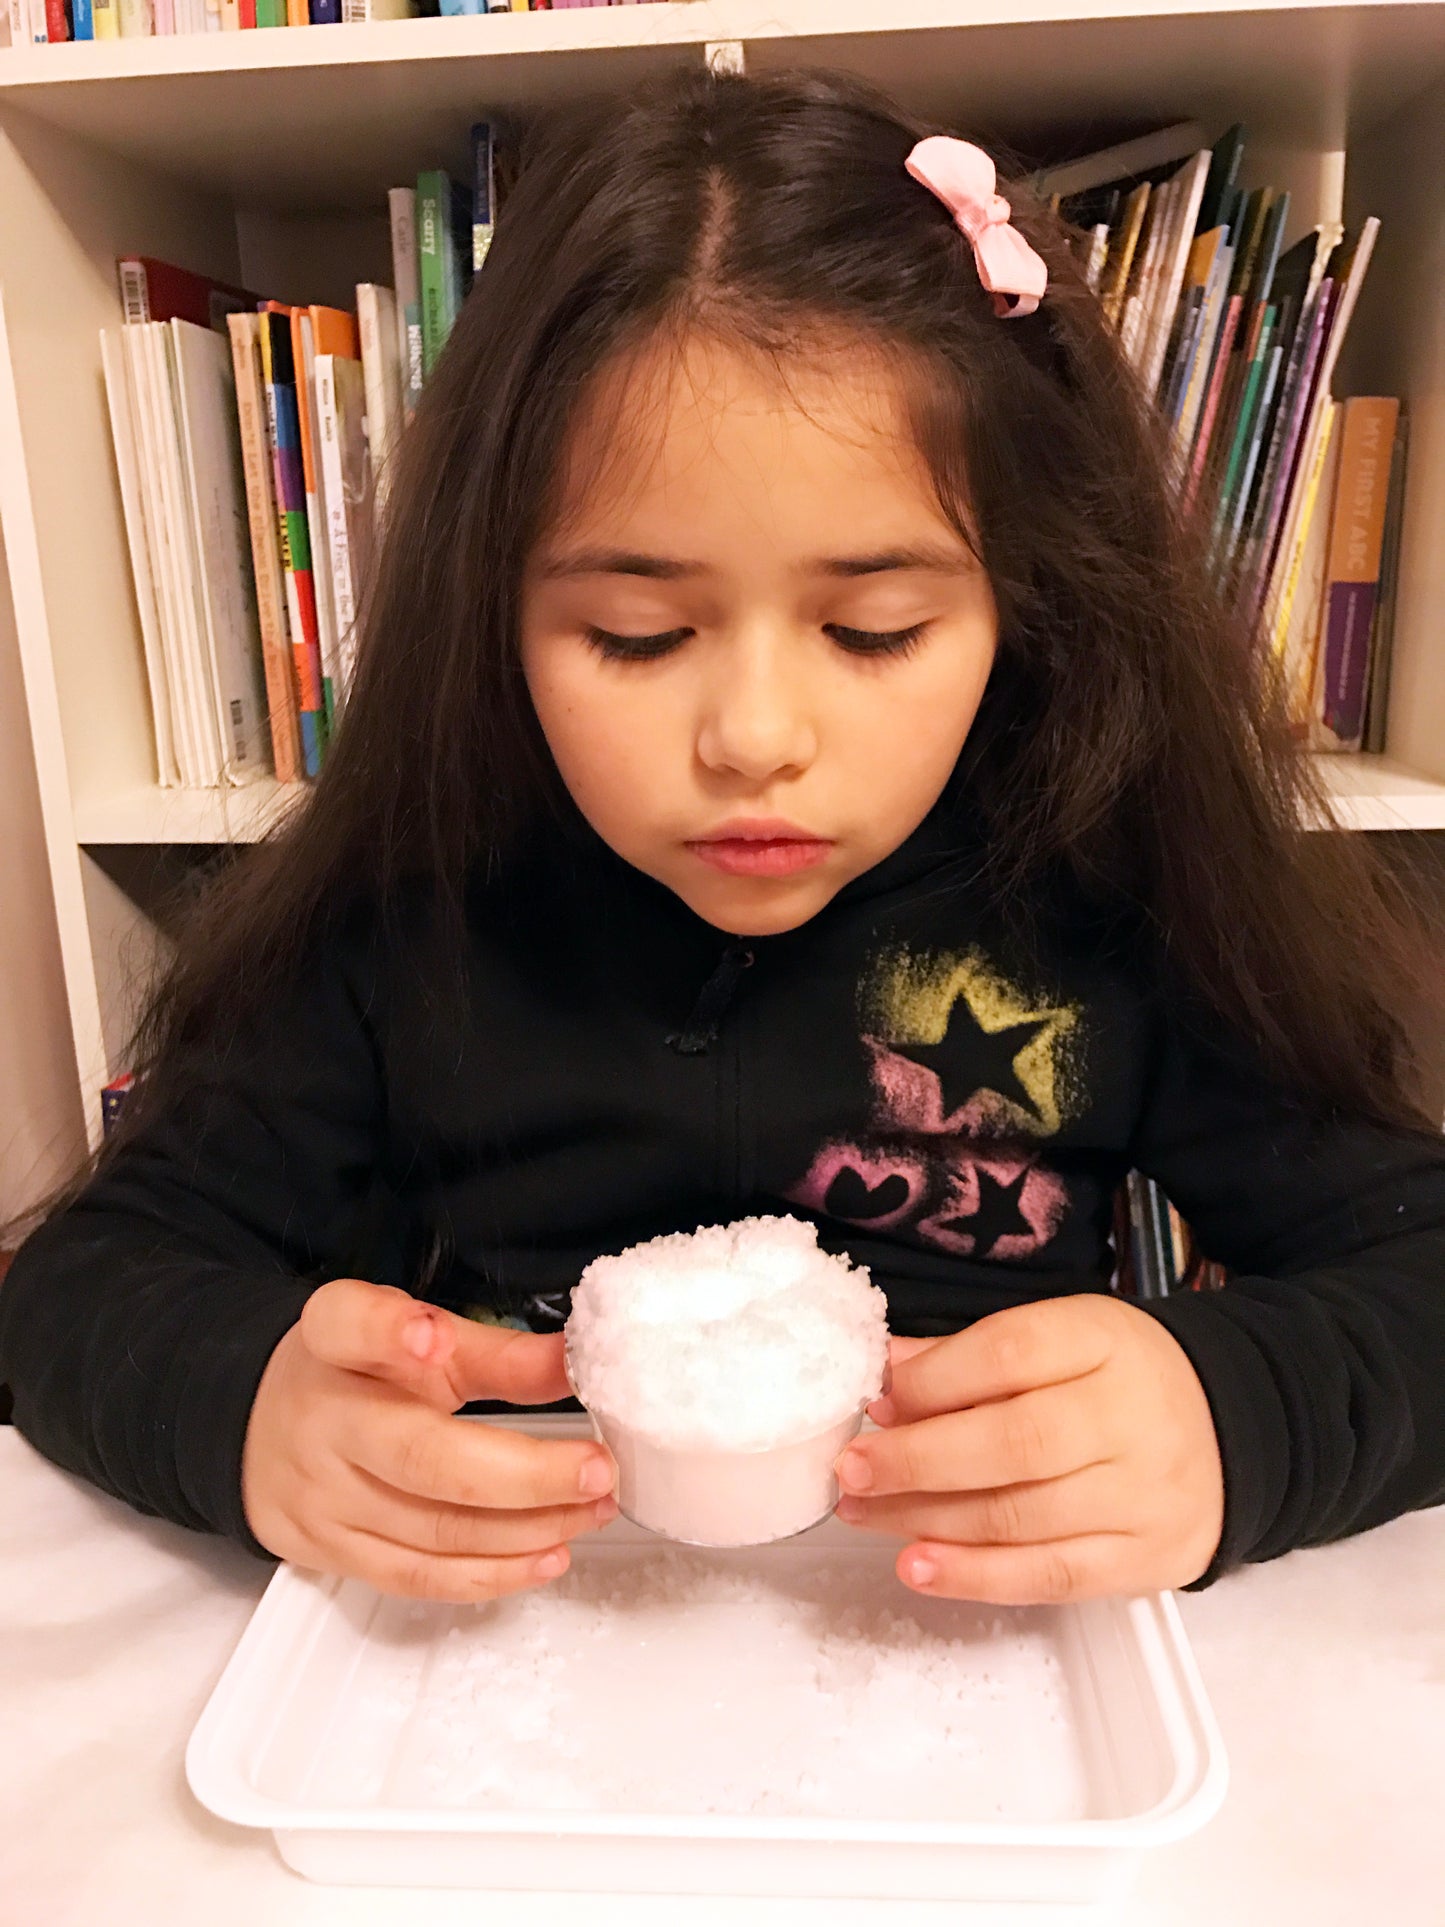 Make your own play snow with instant snow powder